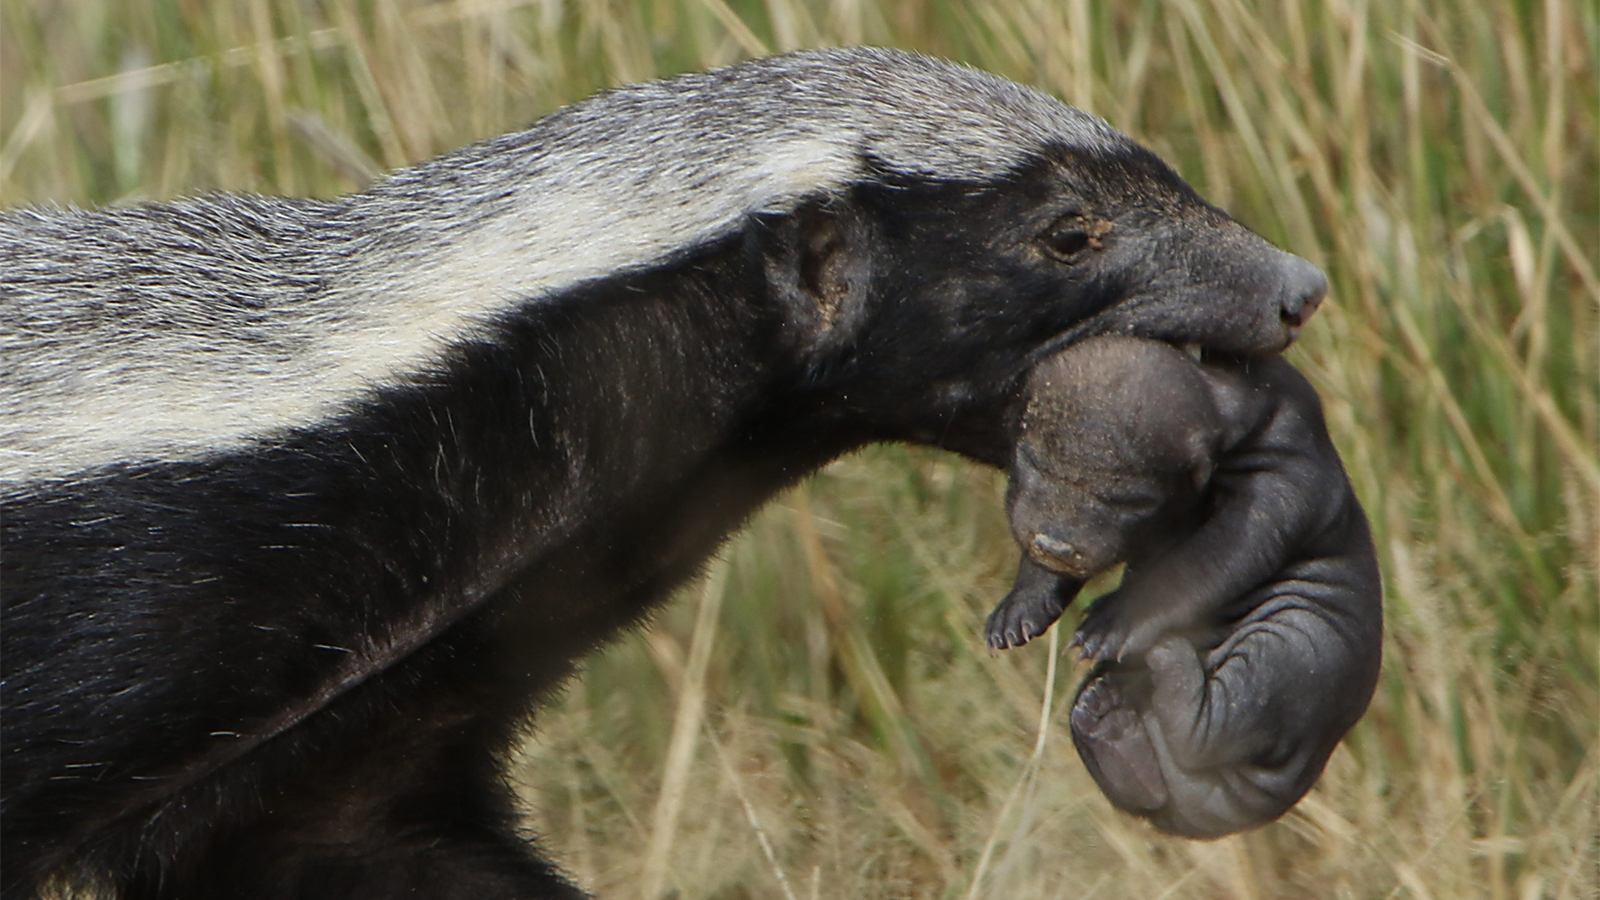 Honey badger, Mellivora capensis, carrying young pup in her mout